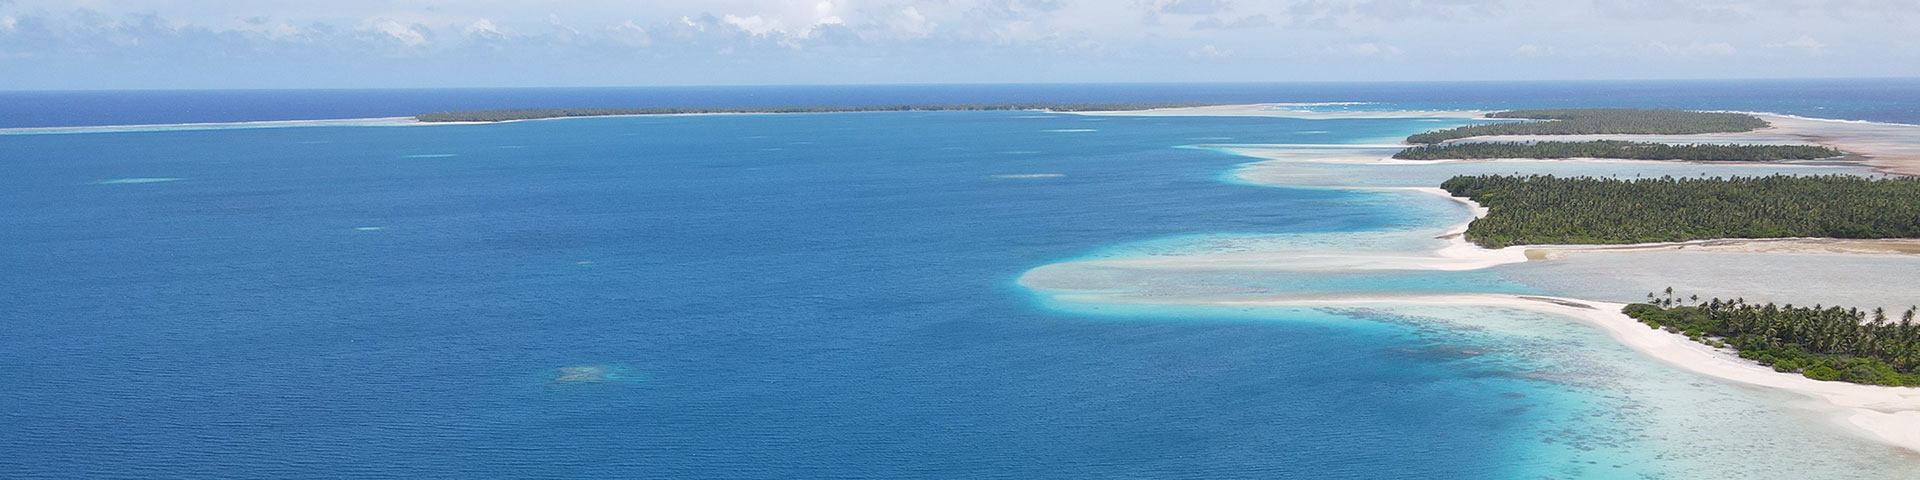 Small green islands surrounded by turquoise sea.